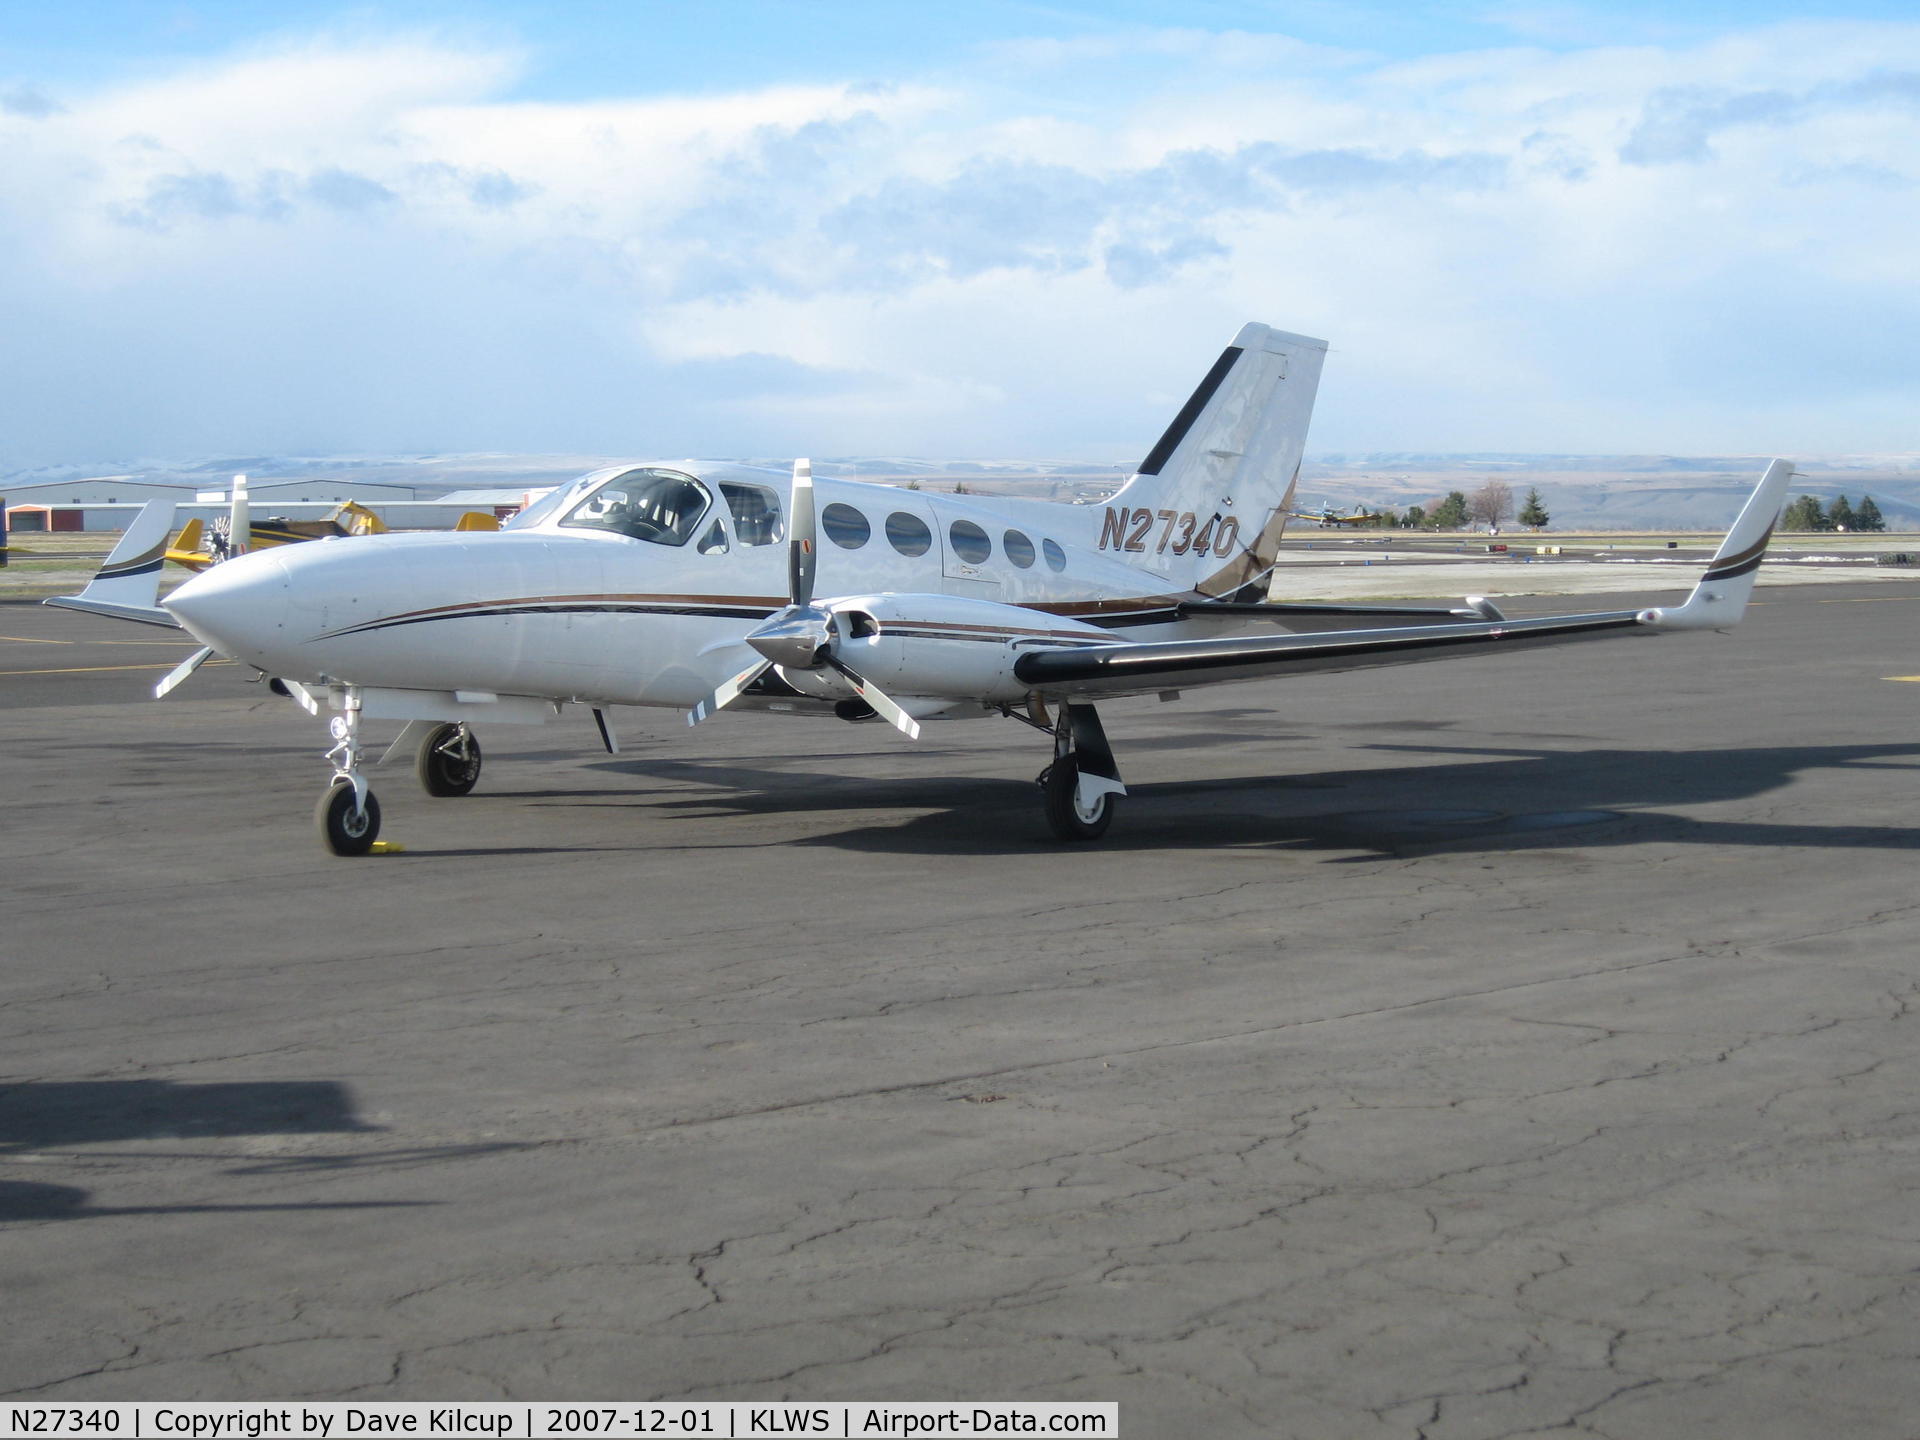 N27340, Cessna 414A Chancellor C/N 414A0462, Nice Chancellor 414AW with Ram IV Pkg, Winglets & Intercoolers